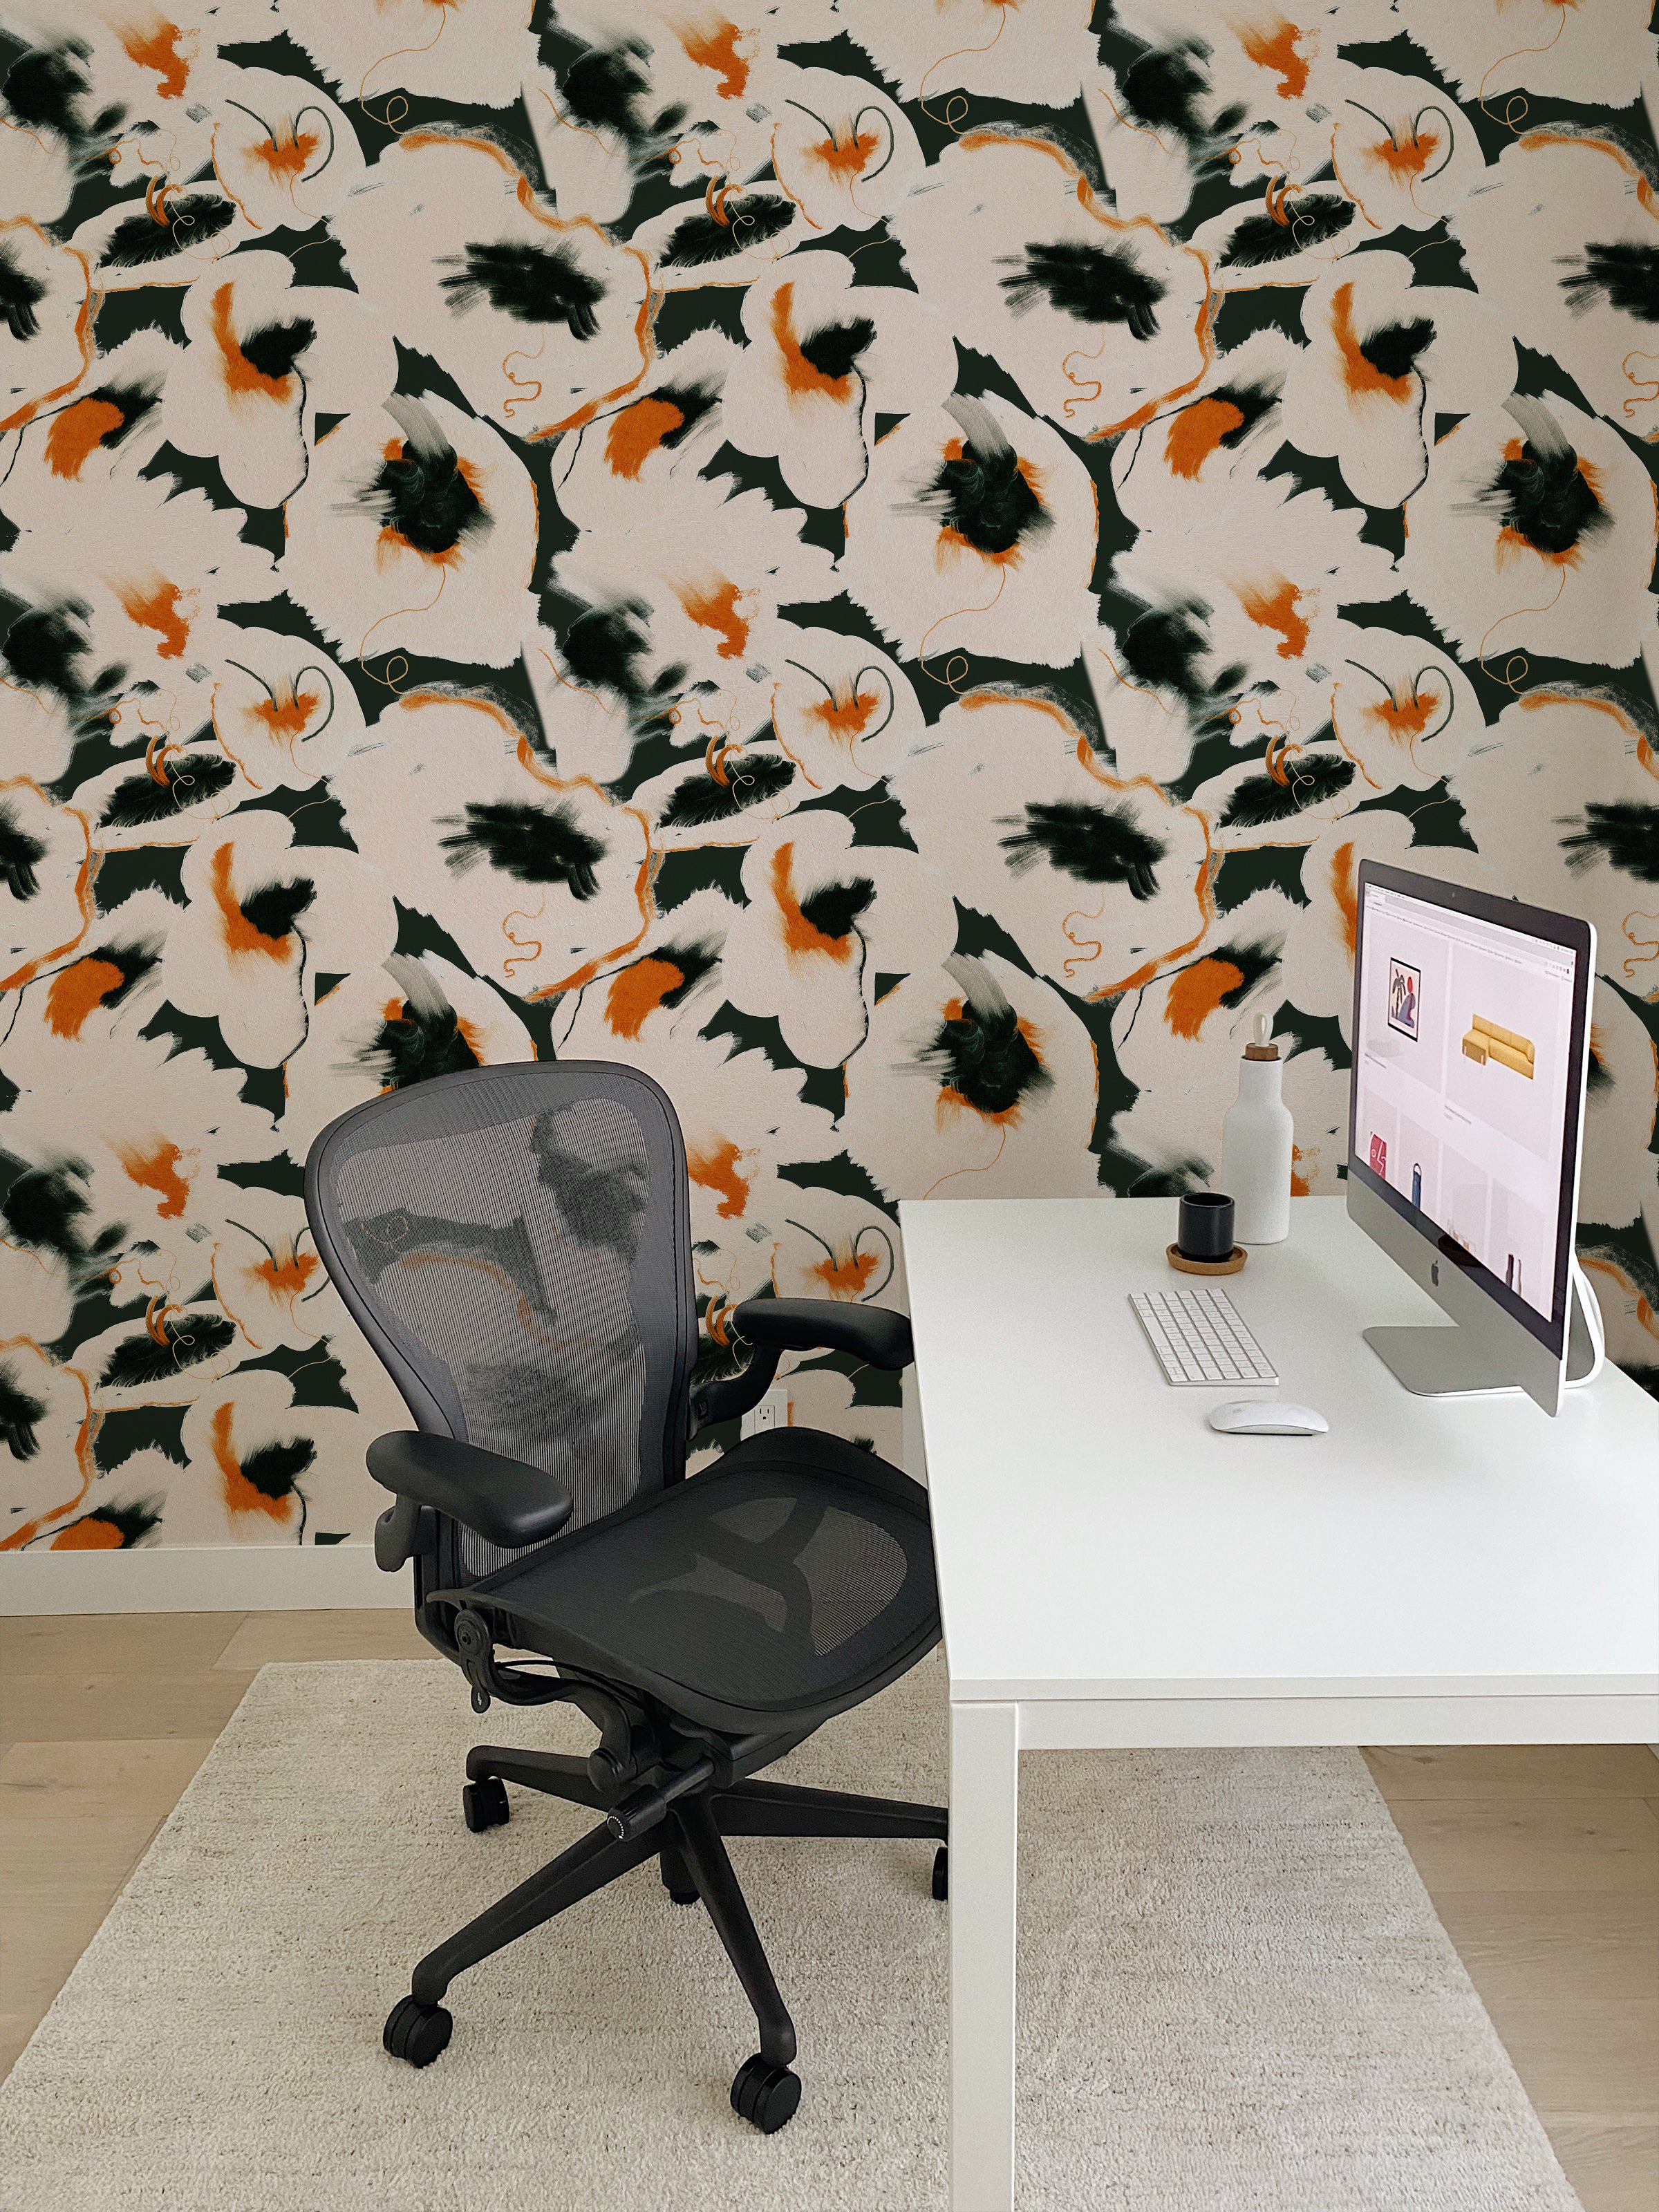 An office space decorated with Abstract Fields Wallpaper, which exhibits a lively abstract pattern with splashes of black and orange on a beige backdrop. The office setup includes a modern desk with a computer, a comfortable office chair, and a cozy white rug, creating a stimulating and creative workspace.